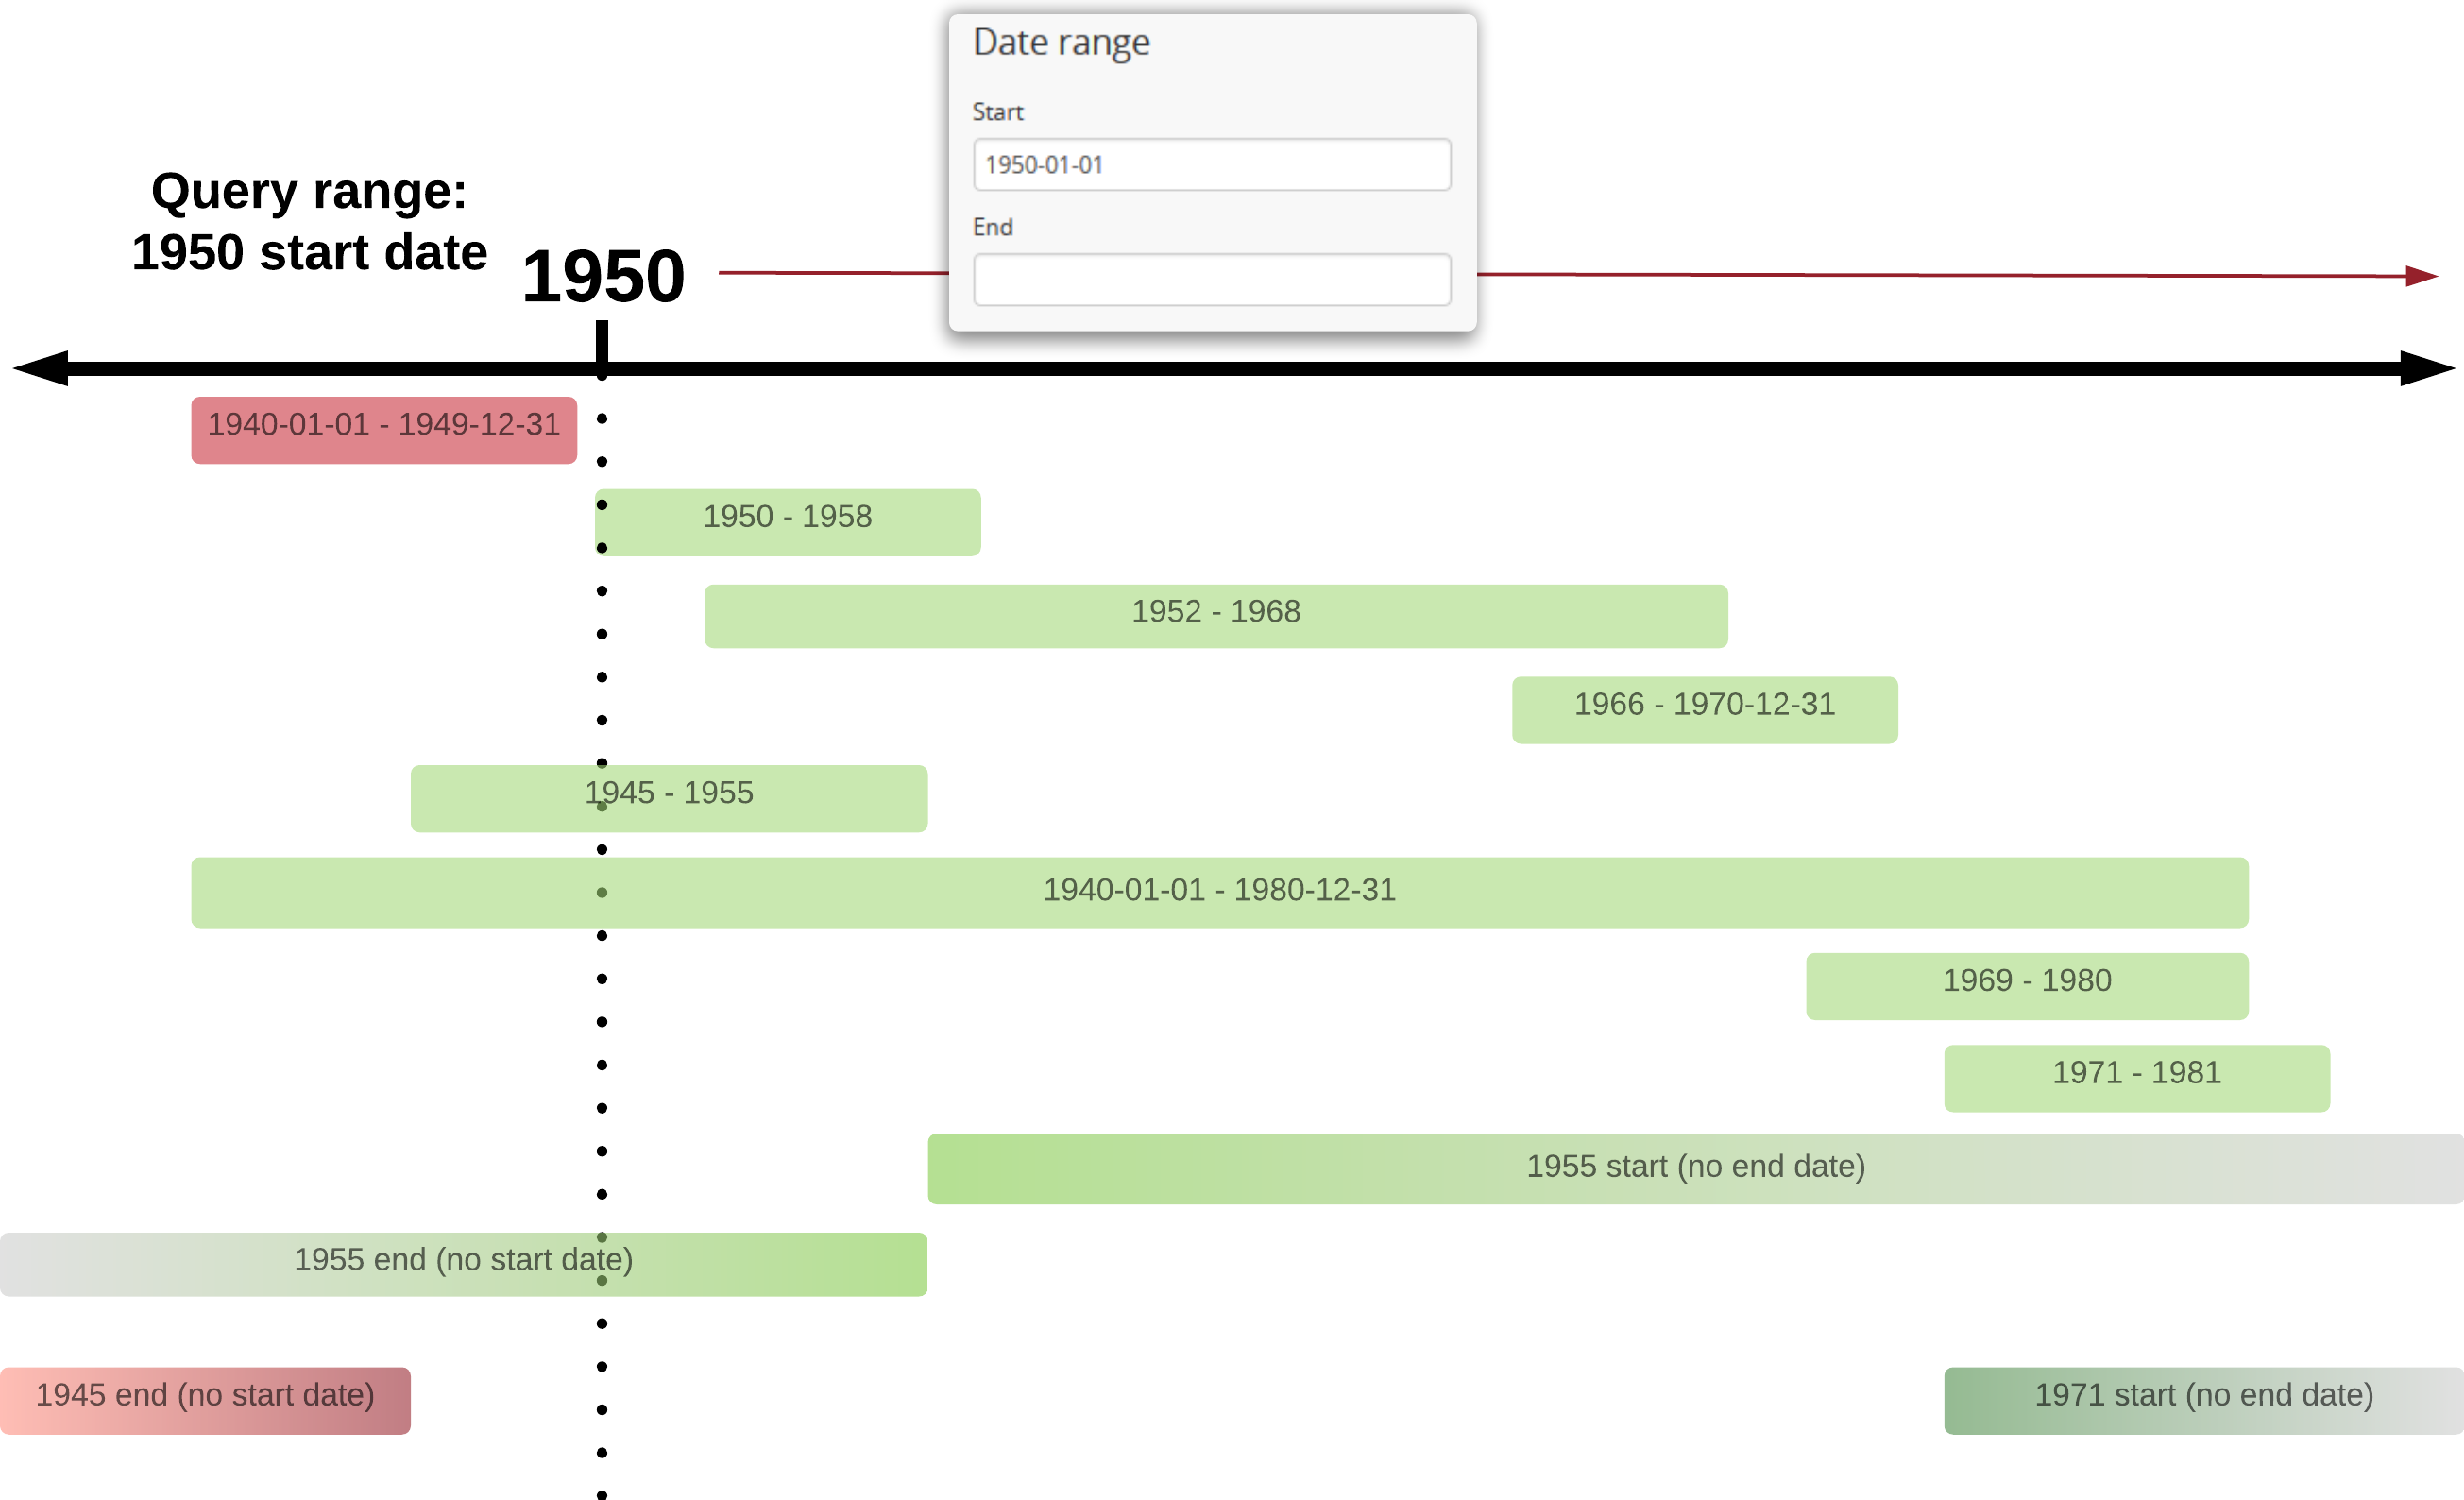 An example of results returned for a 1950 start date query using the Overlapping option